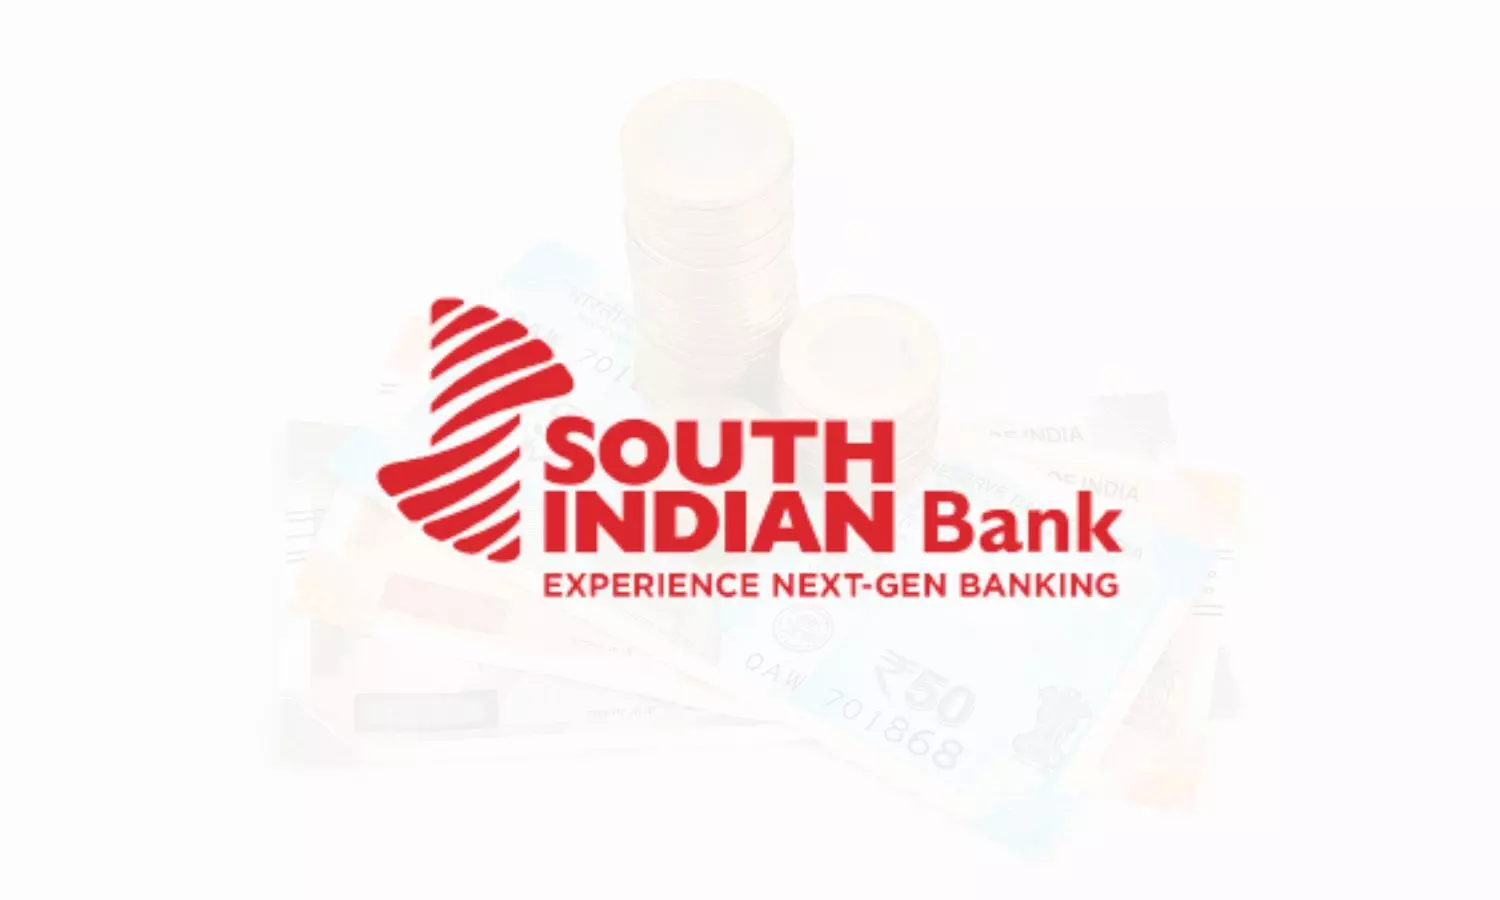 South Indian Bank Logo and Indian Rupee